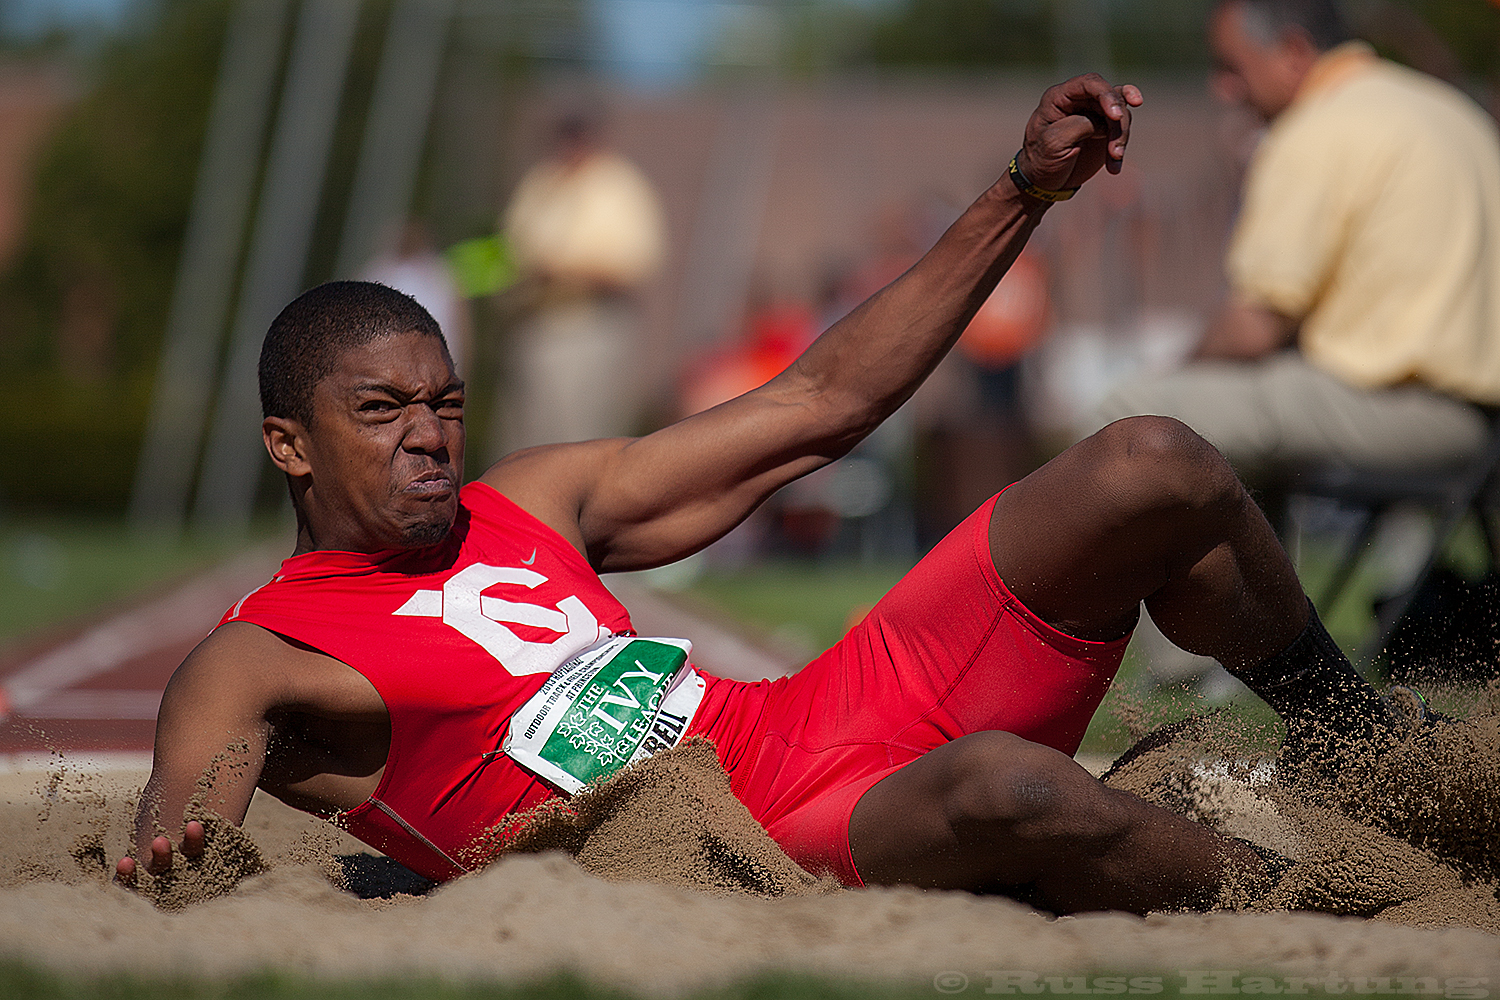 Steven Bell lands in the sand pit during the long jump competition at the Heptagonal Championships. 